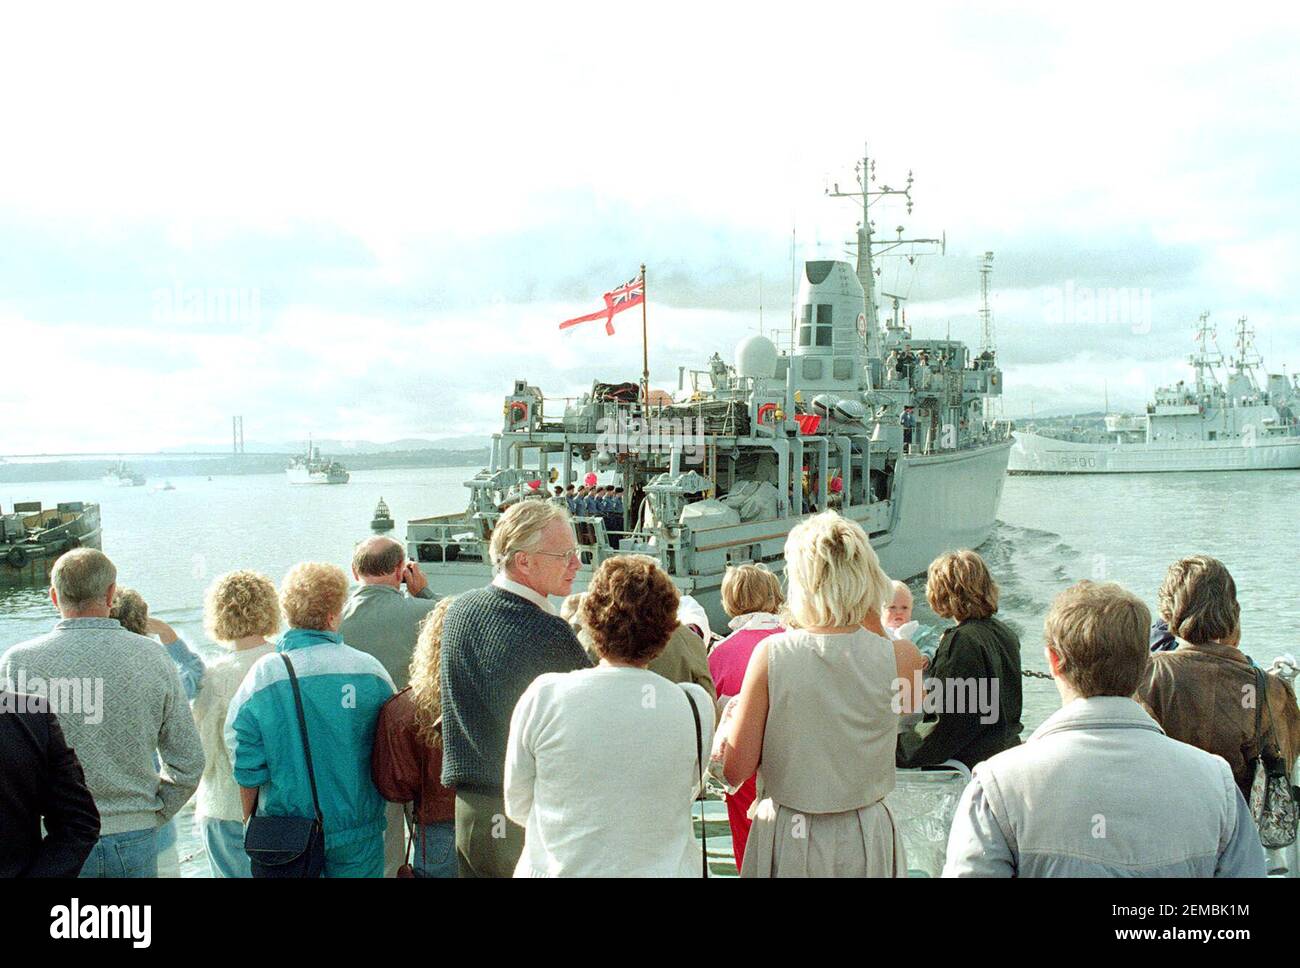 File photo dated 13/08/90 of families bidding farewell to loved ones aboard three Royal Navy mine hunters sailing from Rosyth for the Eastern Mediterranean, as the Gulf crisis continued to escalate, with a coalition naval blockade of Iraq, prior to the start 'proper' of the 1991 Gulf war, signalled by Operation Desert Storm. Issue date: Thursday February 25, 2021. Margaret Thatcher was urged by a government colleague not to embark on a smear campaign against Saddam Hussein at the start of the Gulf War amid concerns over Britain's arms dealings with the Iraqi regime, previously classified paper Stock Photo